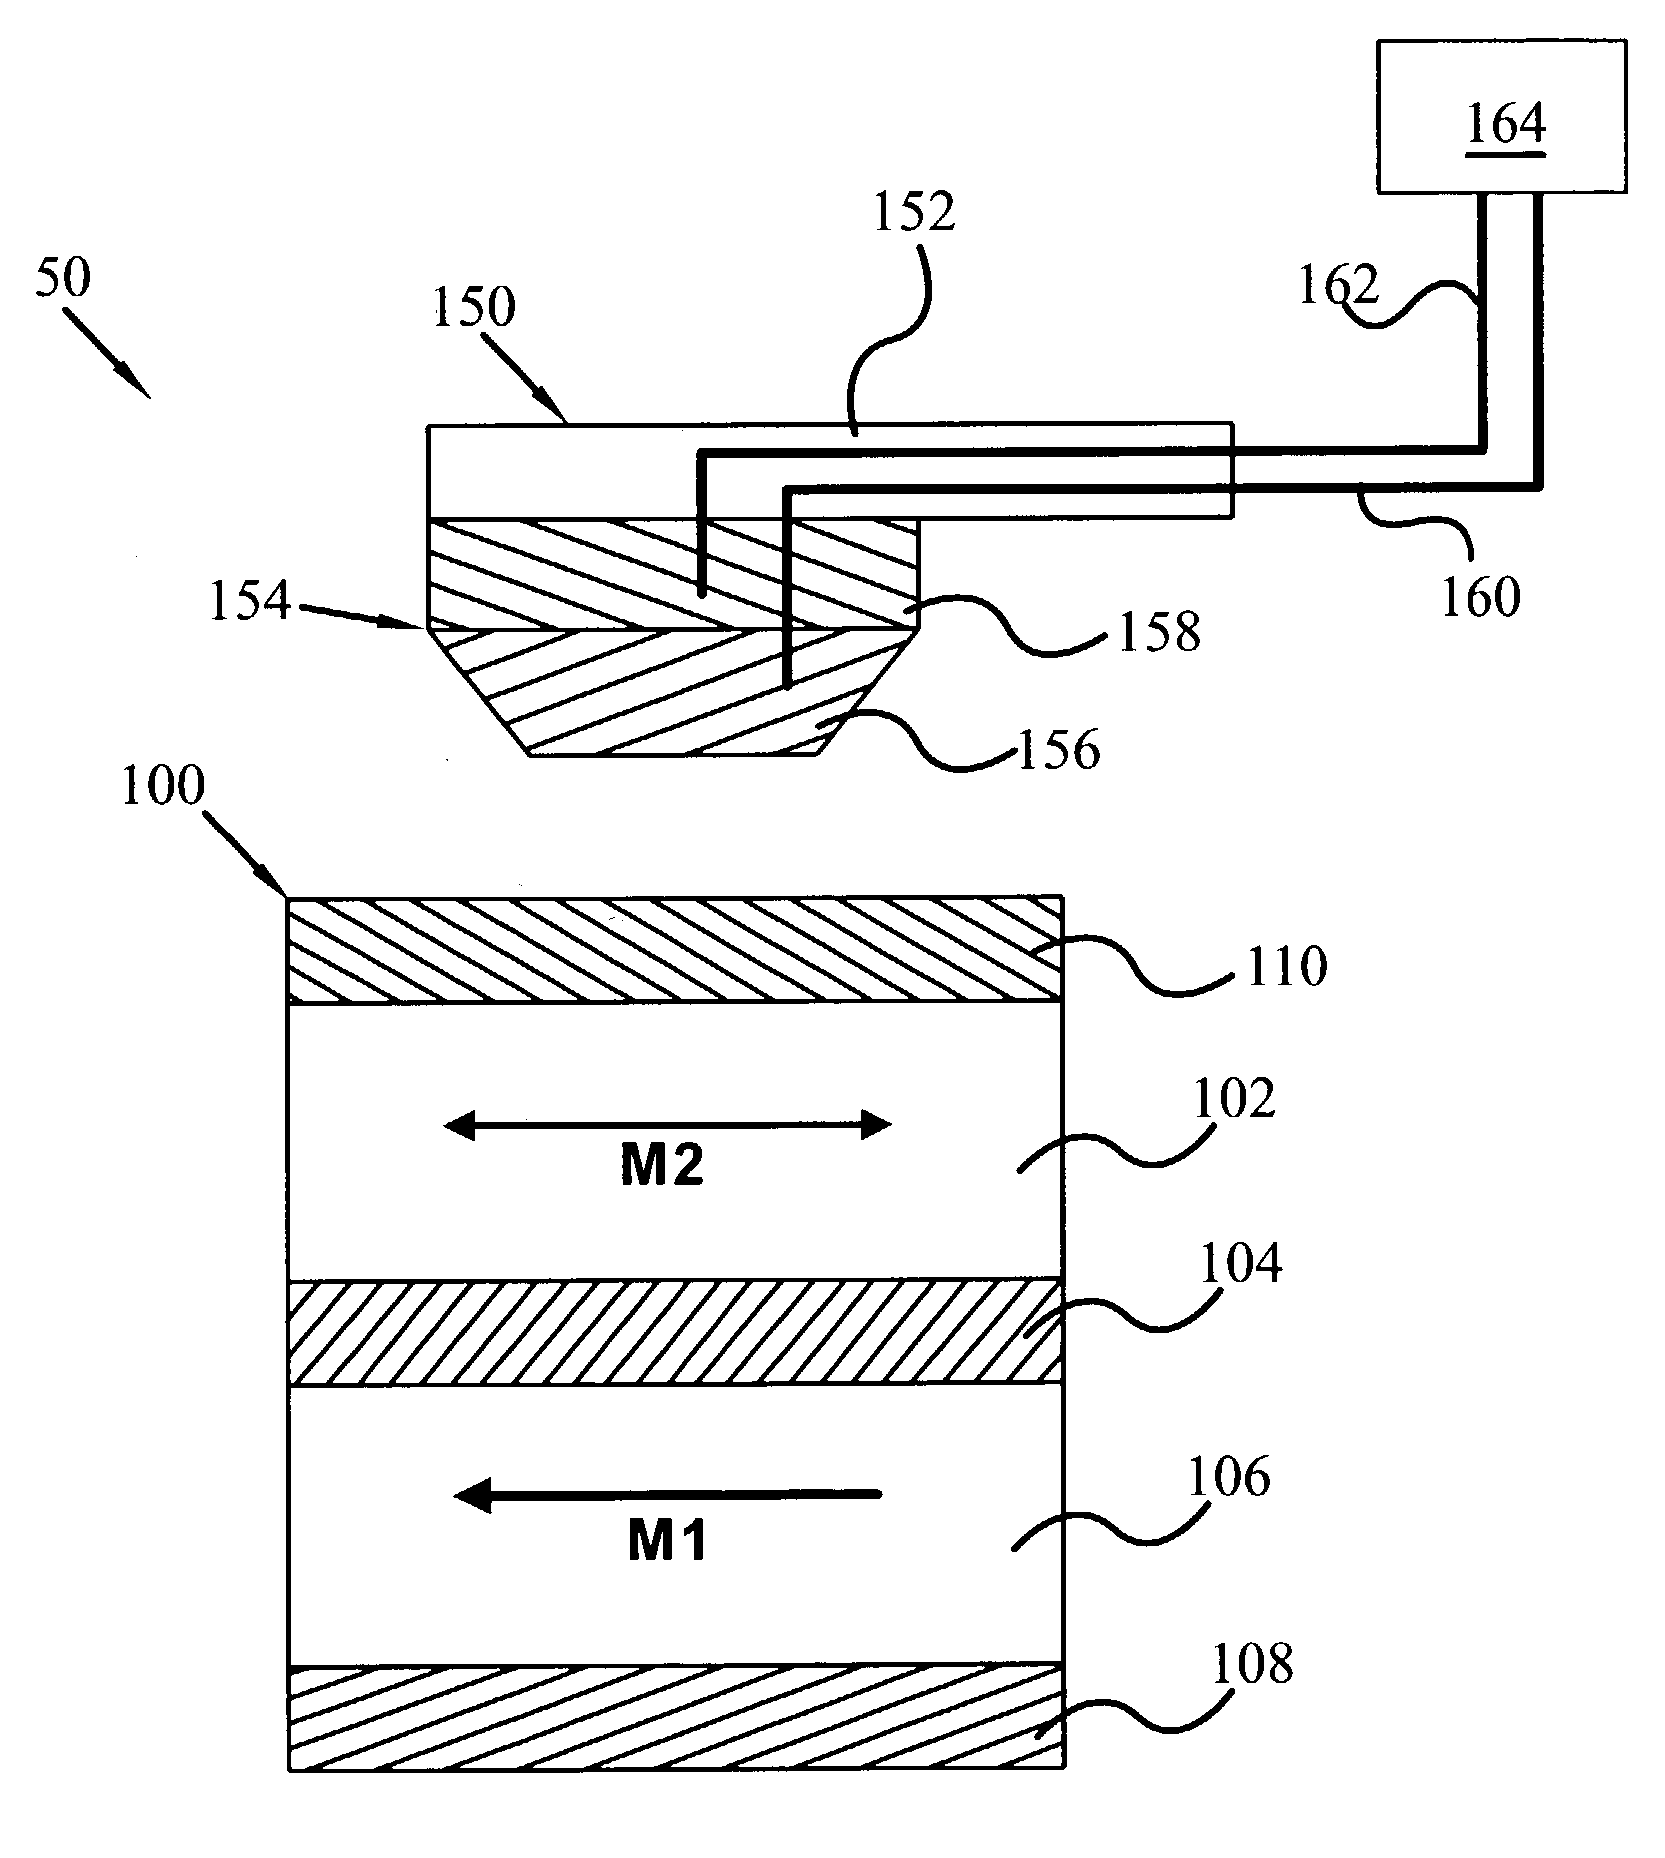 Thermal-assisted magnetic memory storage device